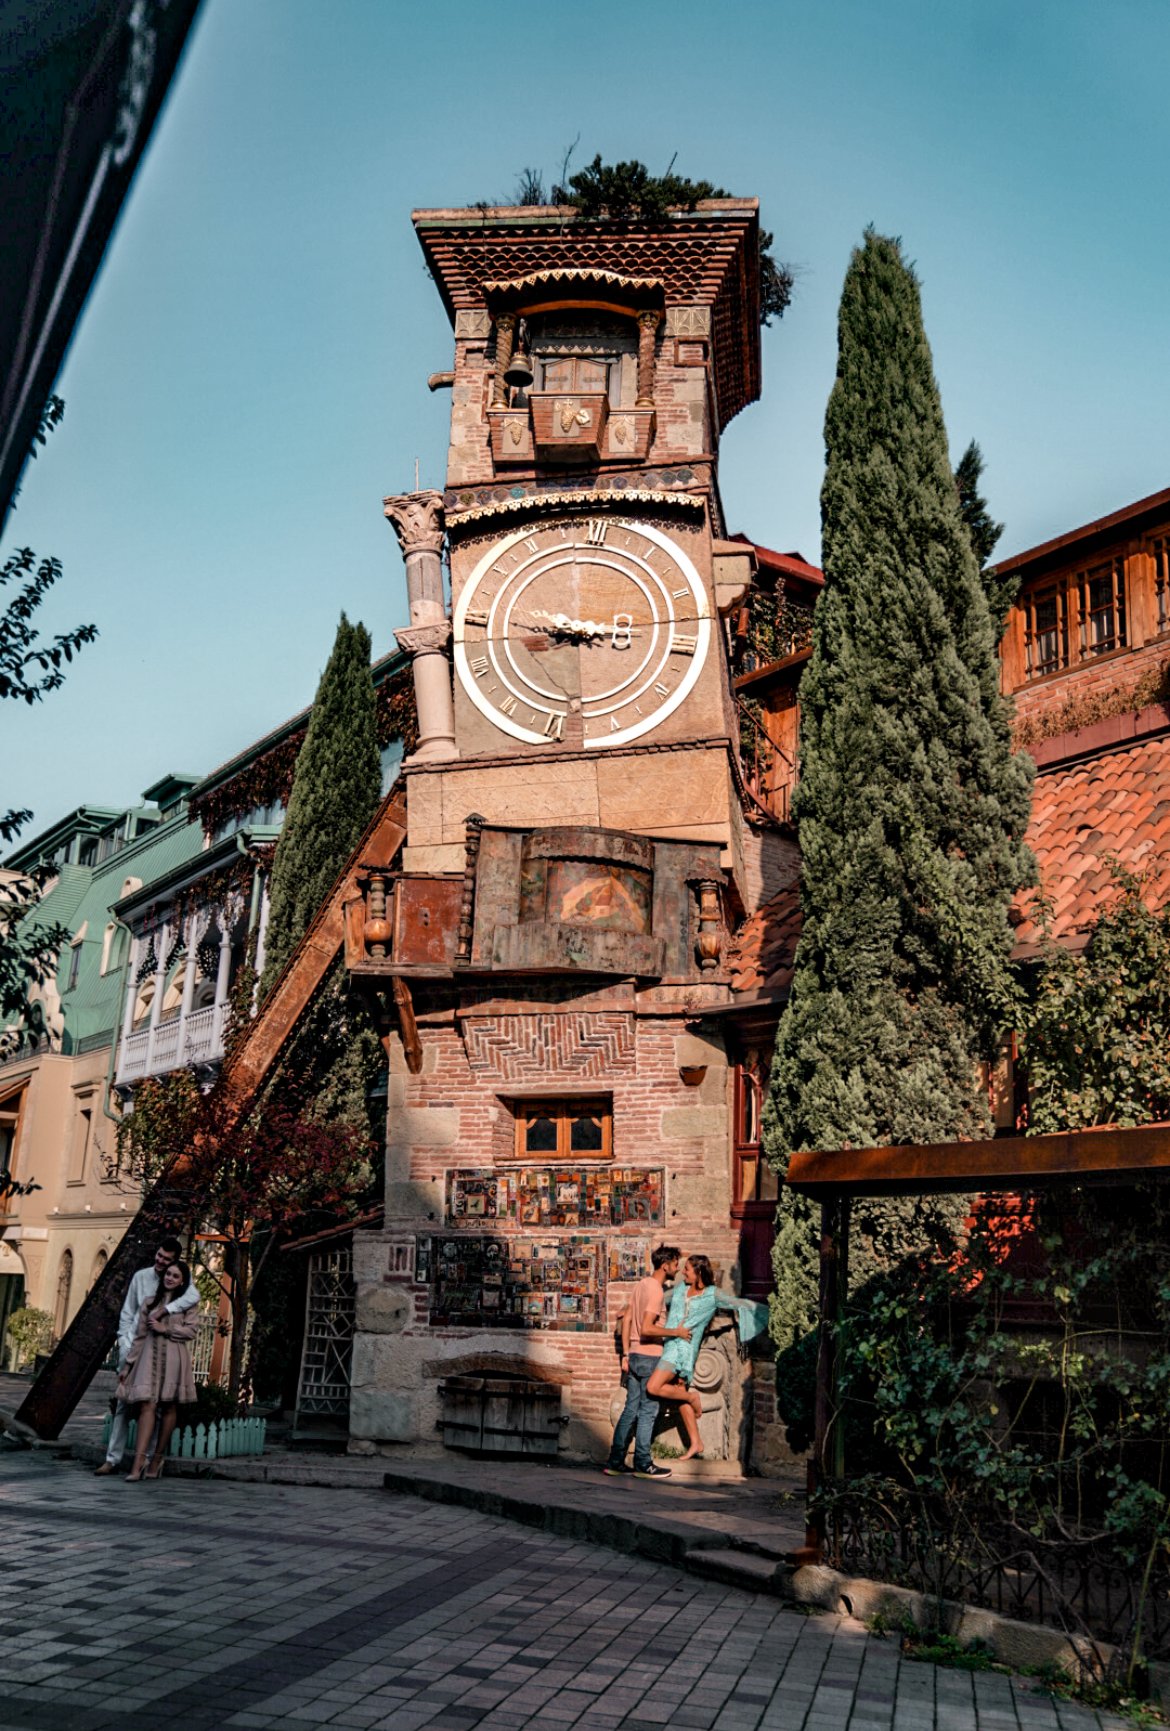 Clock tower, things to do in Tbilisi, Georgia